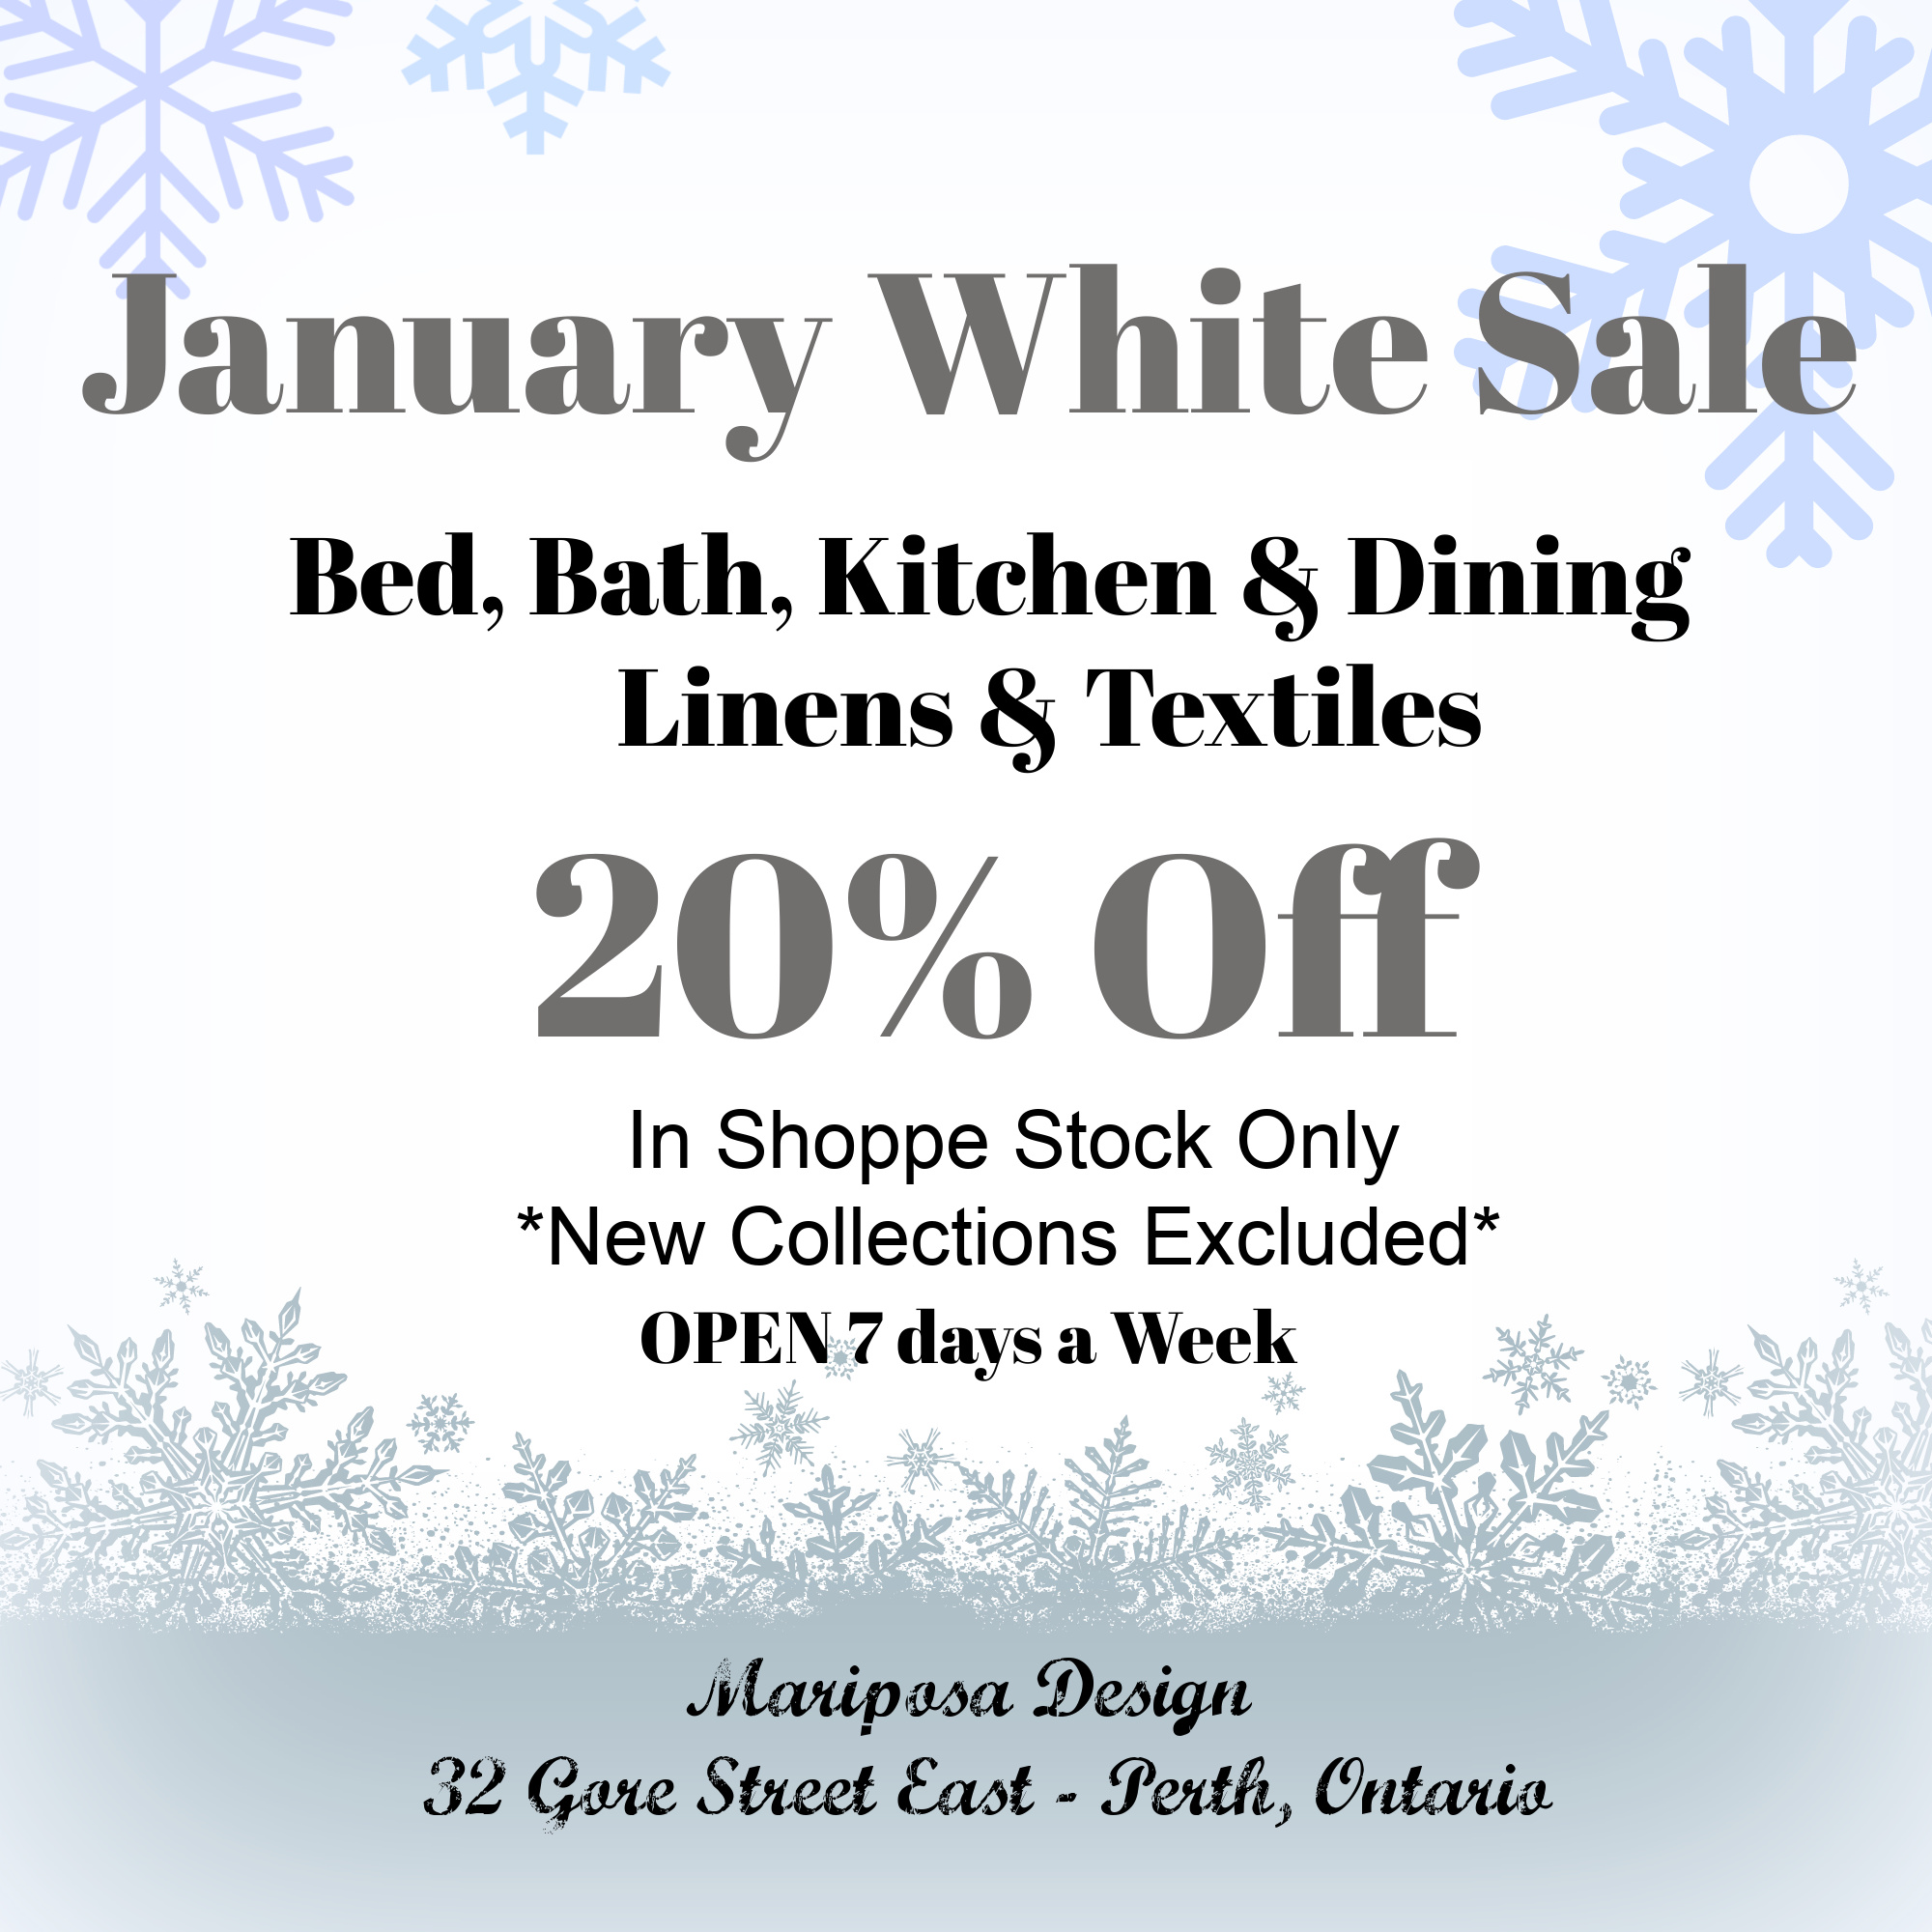 Our January White Sale!